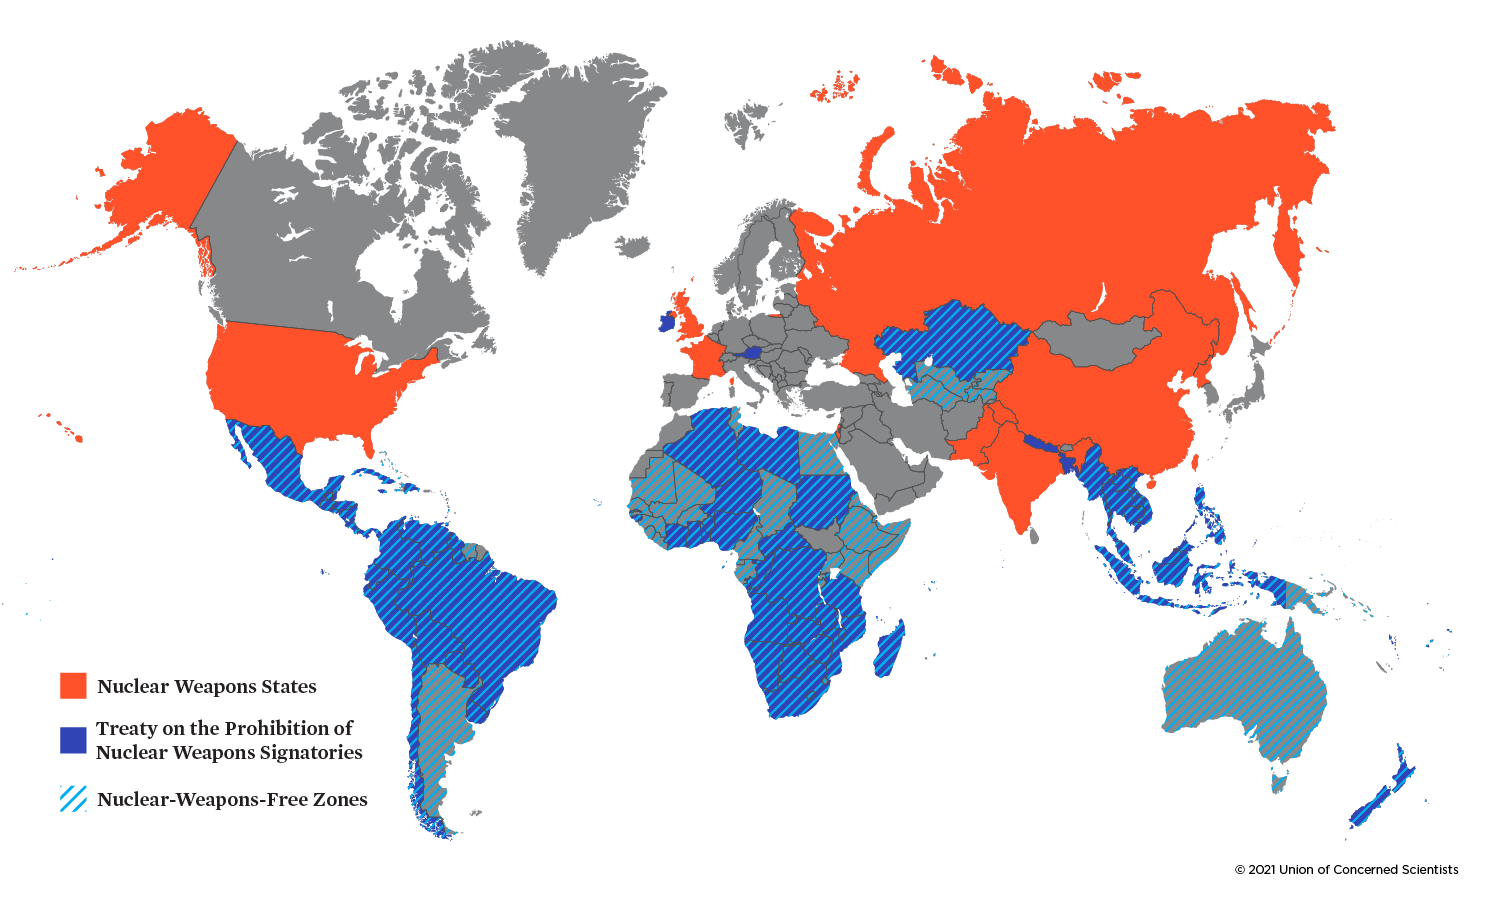 World map showing nuclear weapons states, signatories of TPNW, and countries that are nuclear-weapons-free zones